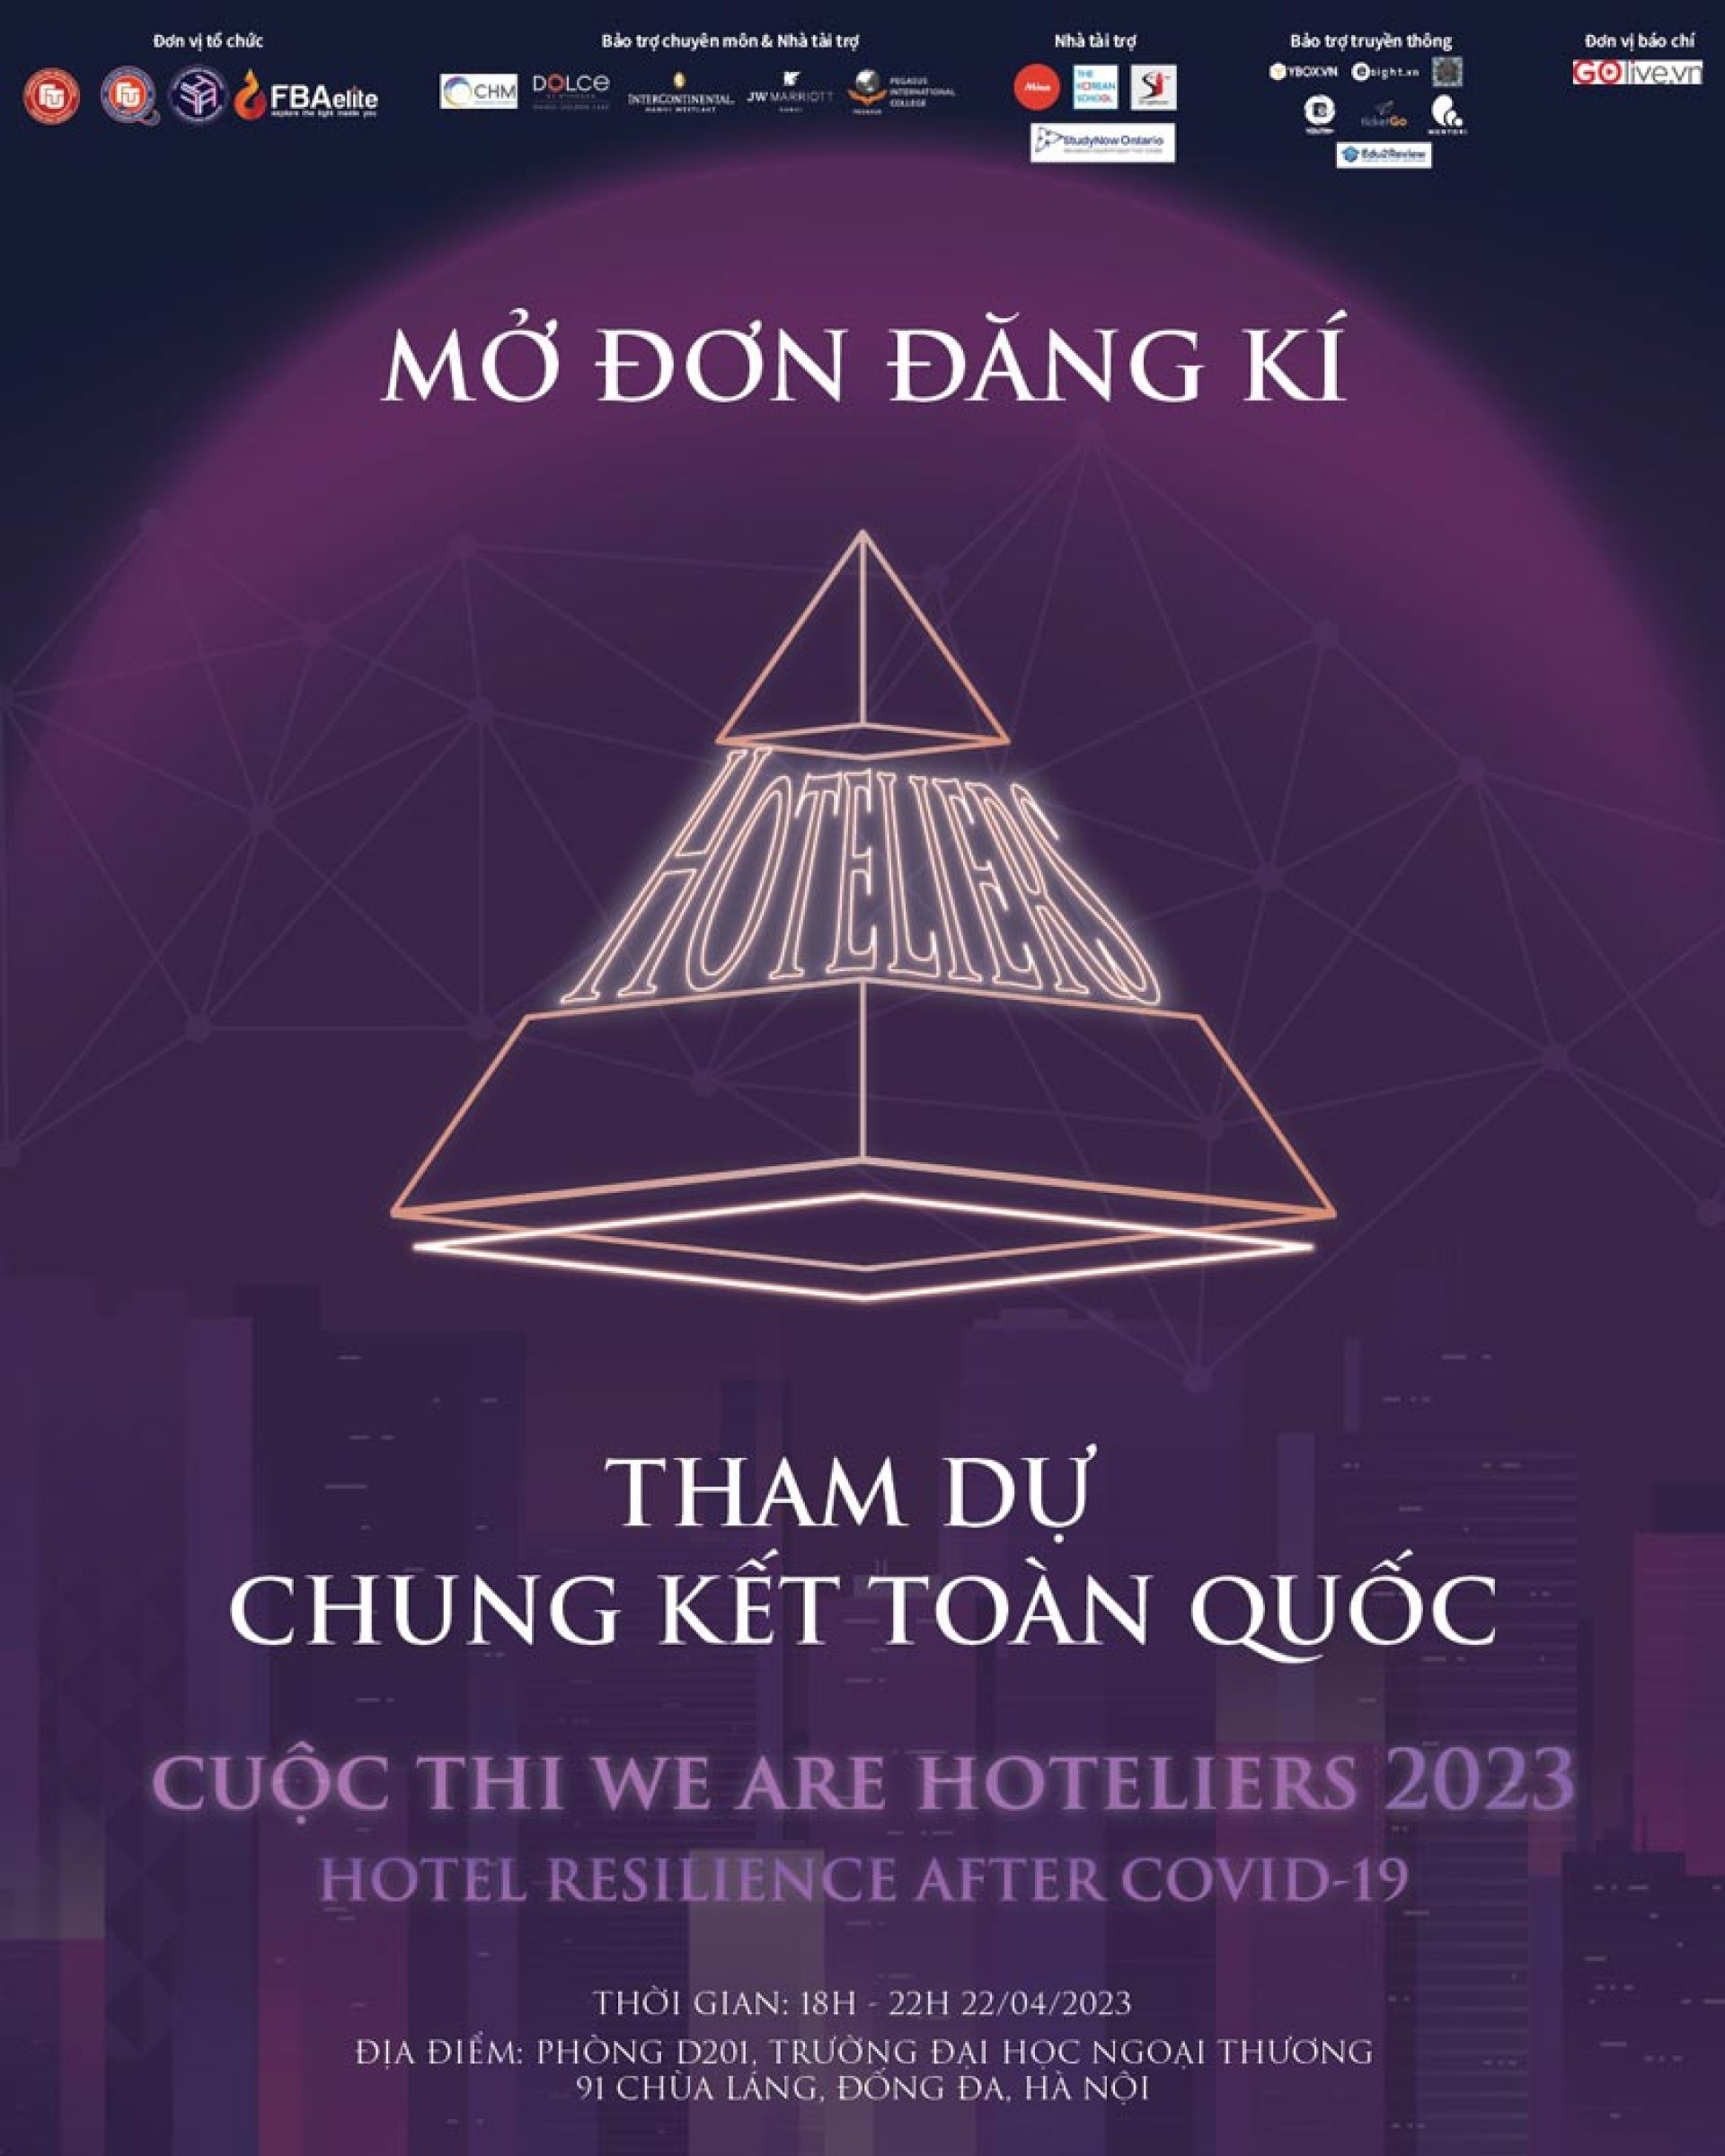 ĐÊM CHUNG KẾT TOÀN QUỐC CUỘC THI WE ARE HOTELIERS : "HOTEL RESILIENCE AFTER COVID-19"